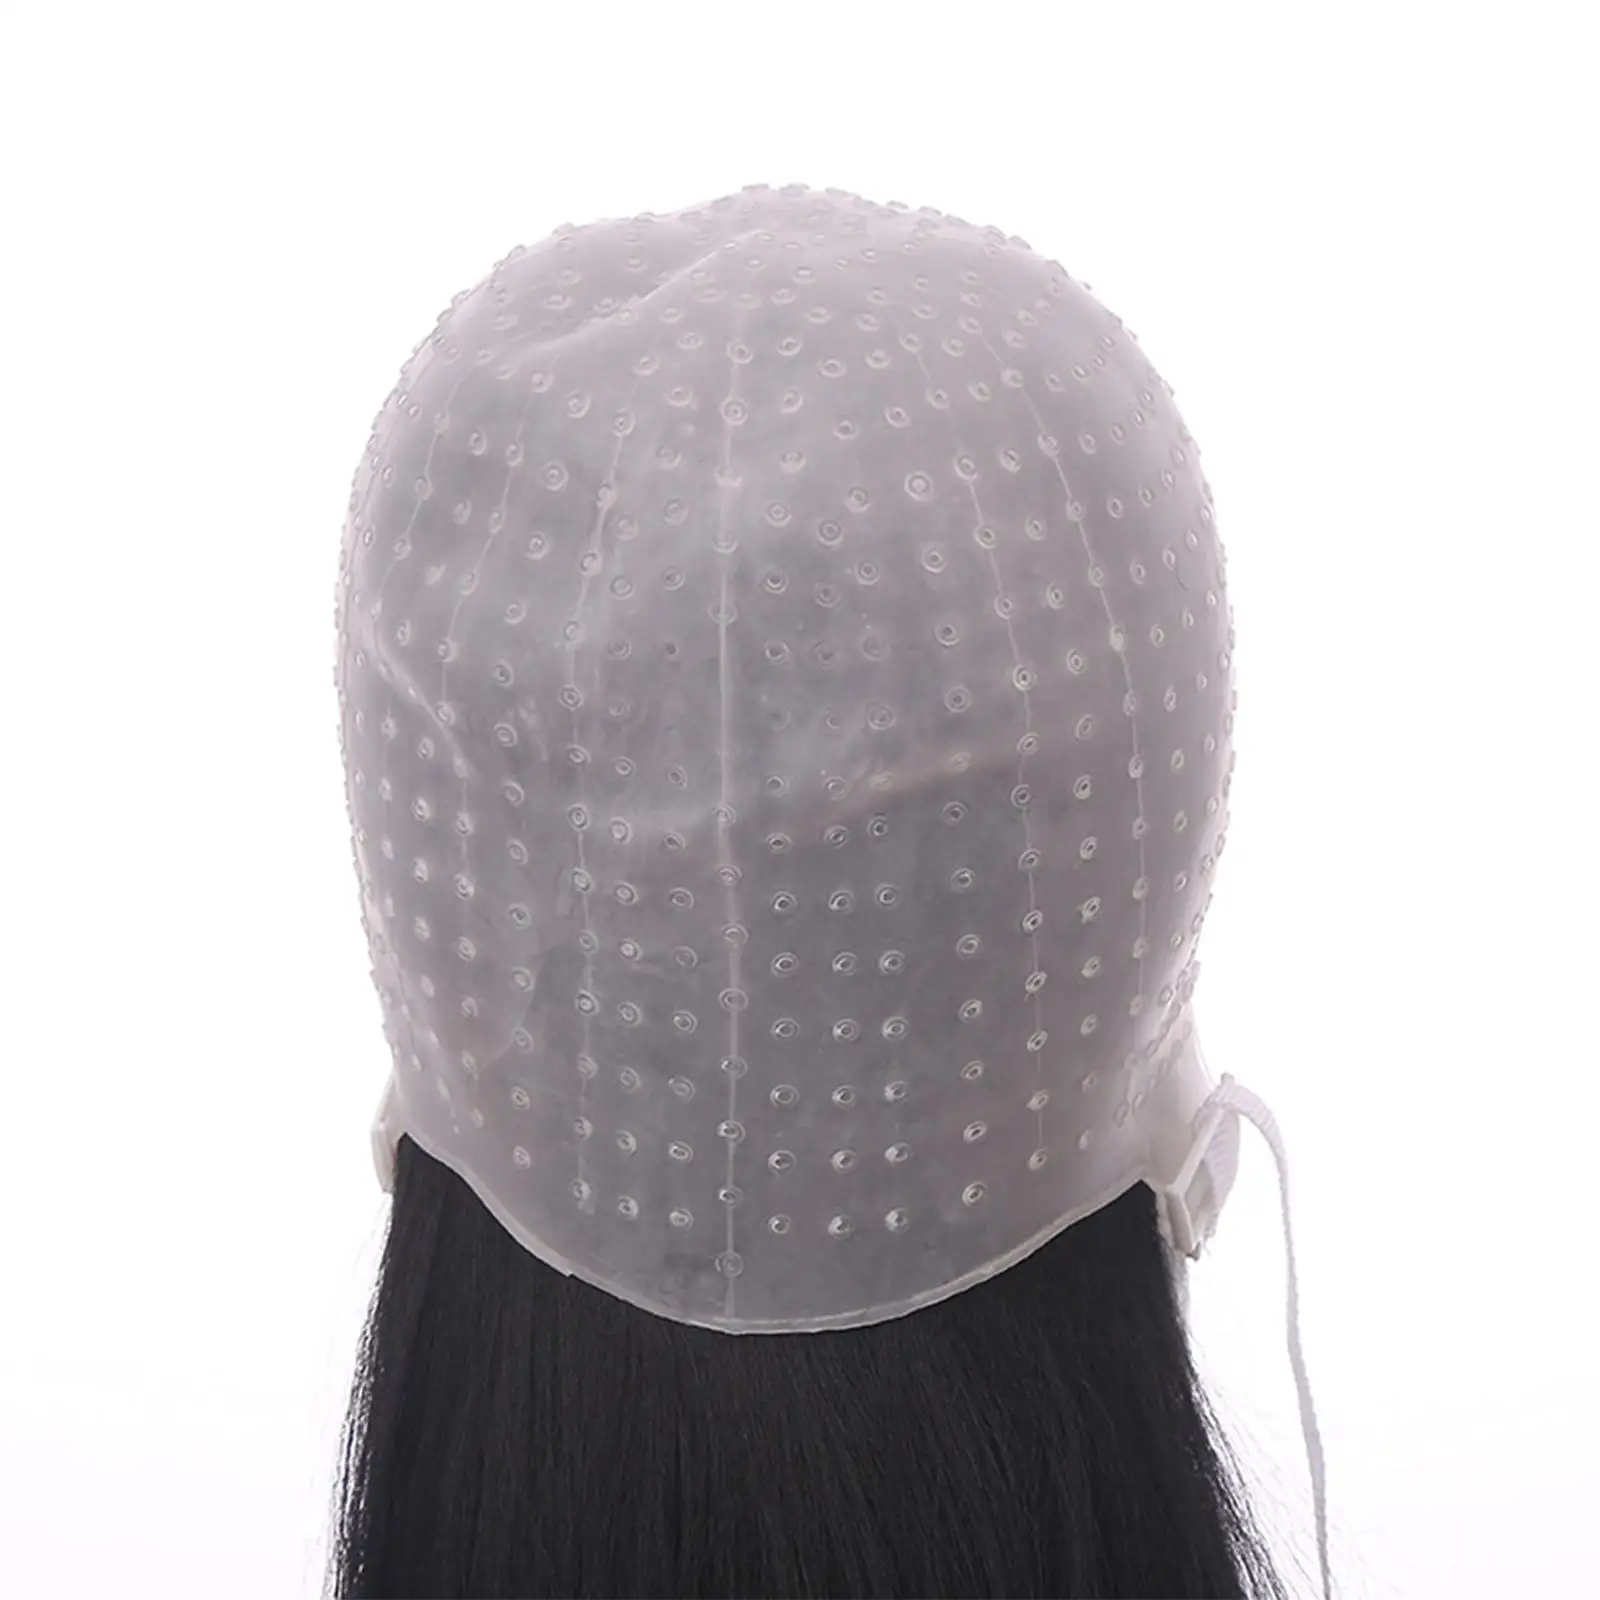 Reusable Silicone Hair Highlighting Hat, Adjustable Professional with Hair Dye Hat for Barber Hair Styling Tools  